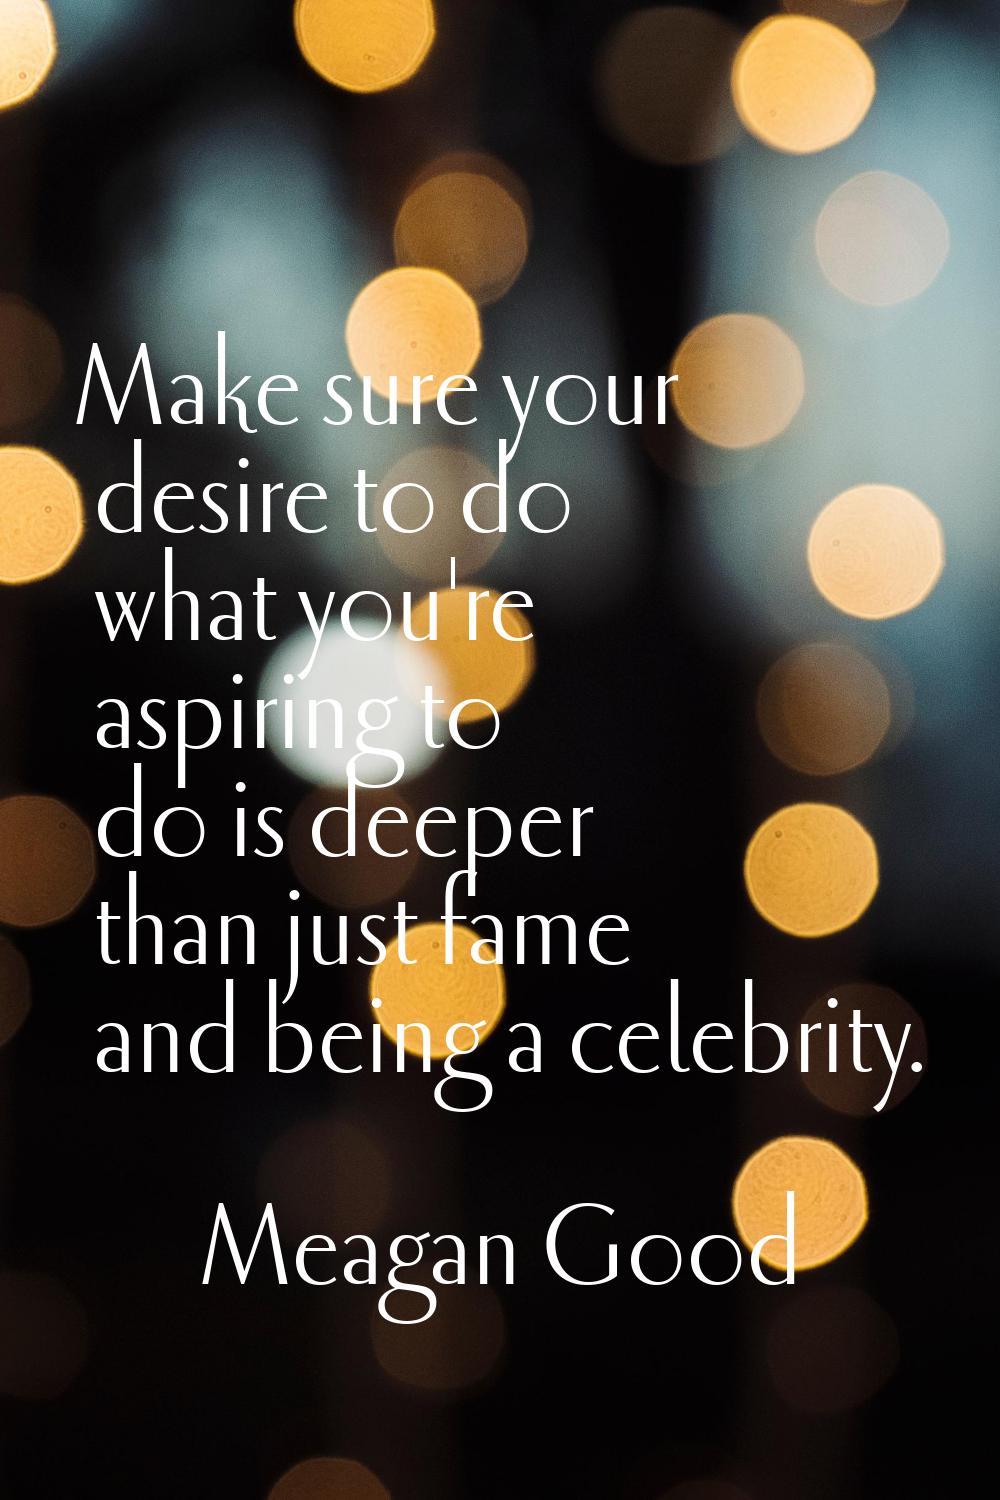 Make sure your desire to do what you're aspiring to do is deeper than just fame and being a celebri